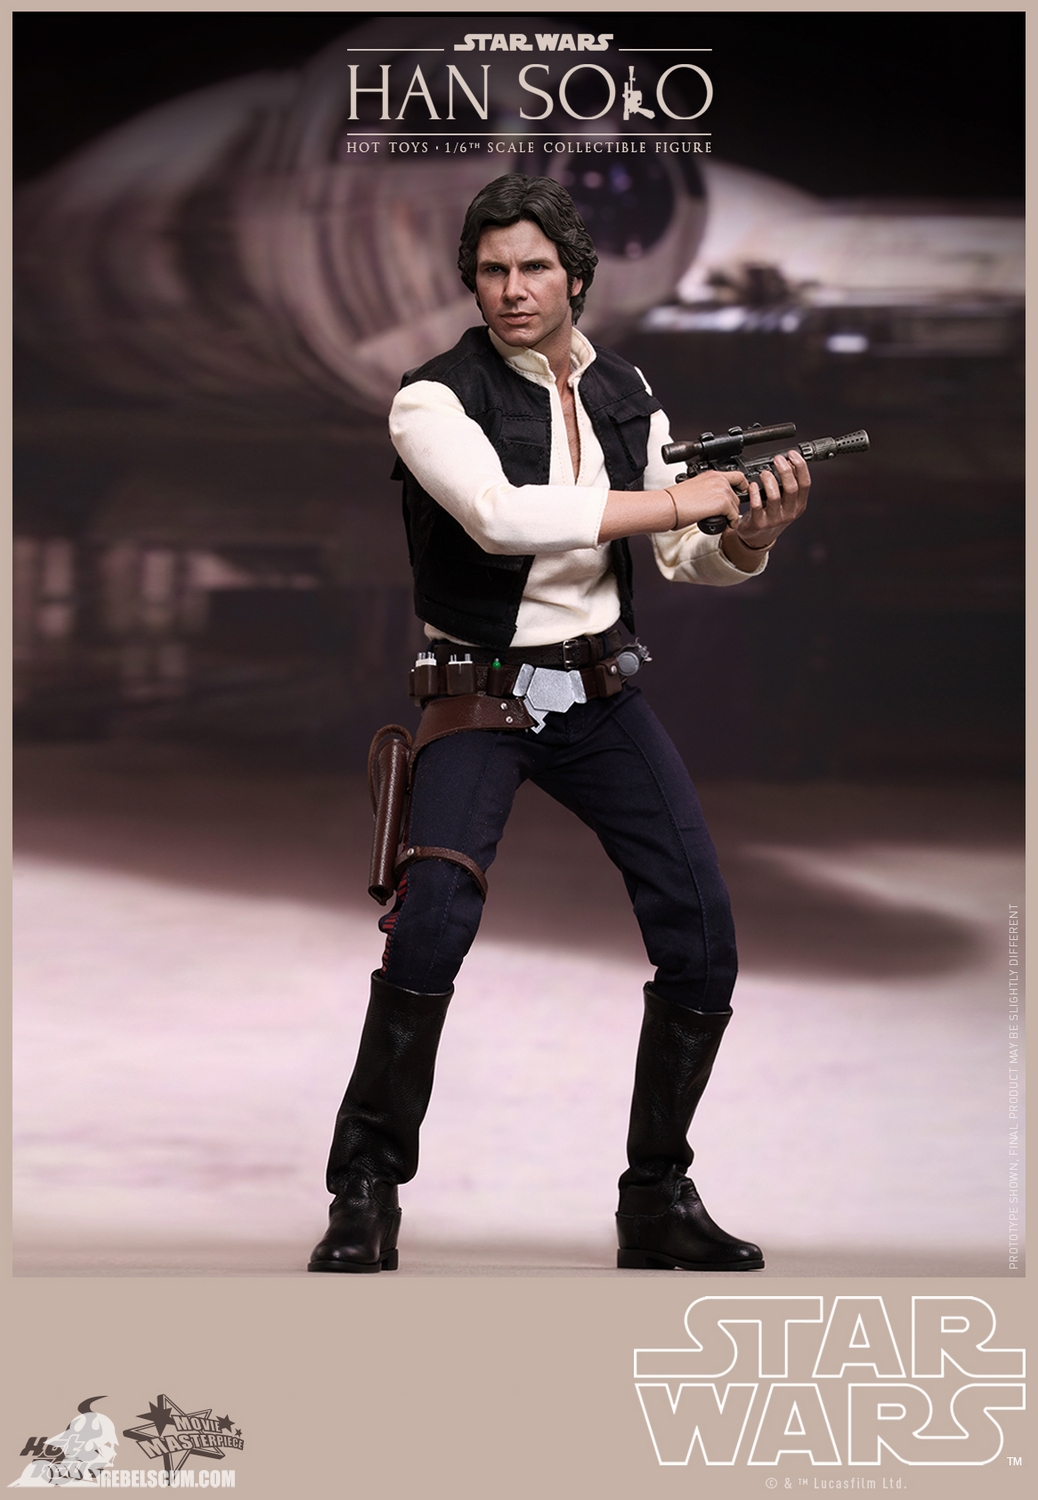 Hot-Toys-A-New-Hope-Han-solo-Movie-Masterpiece-Series-001.jpg